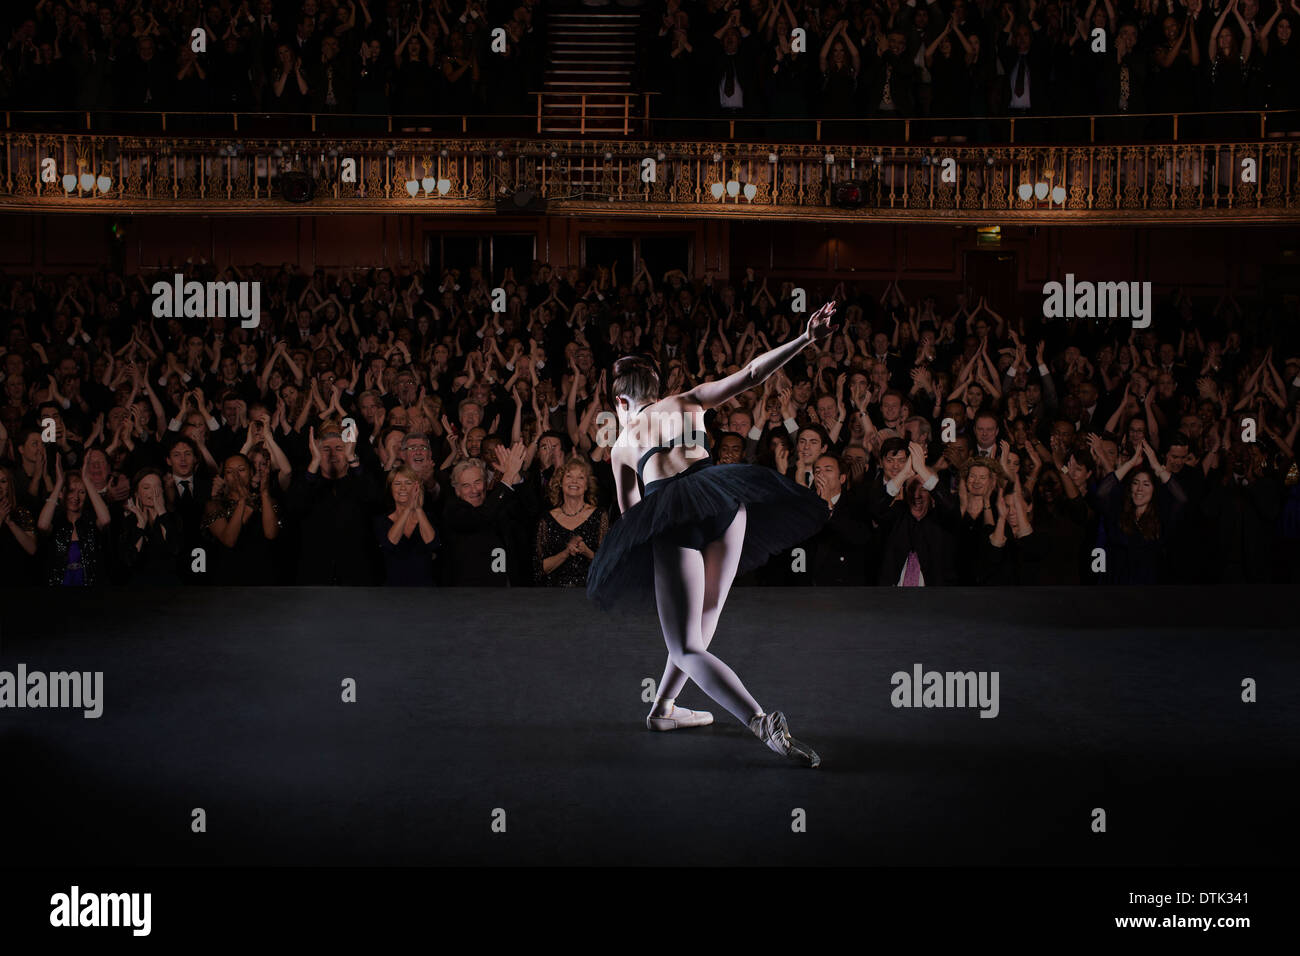 Ballerina bowing on stage in theater Stock Photo